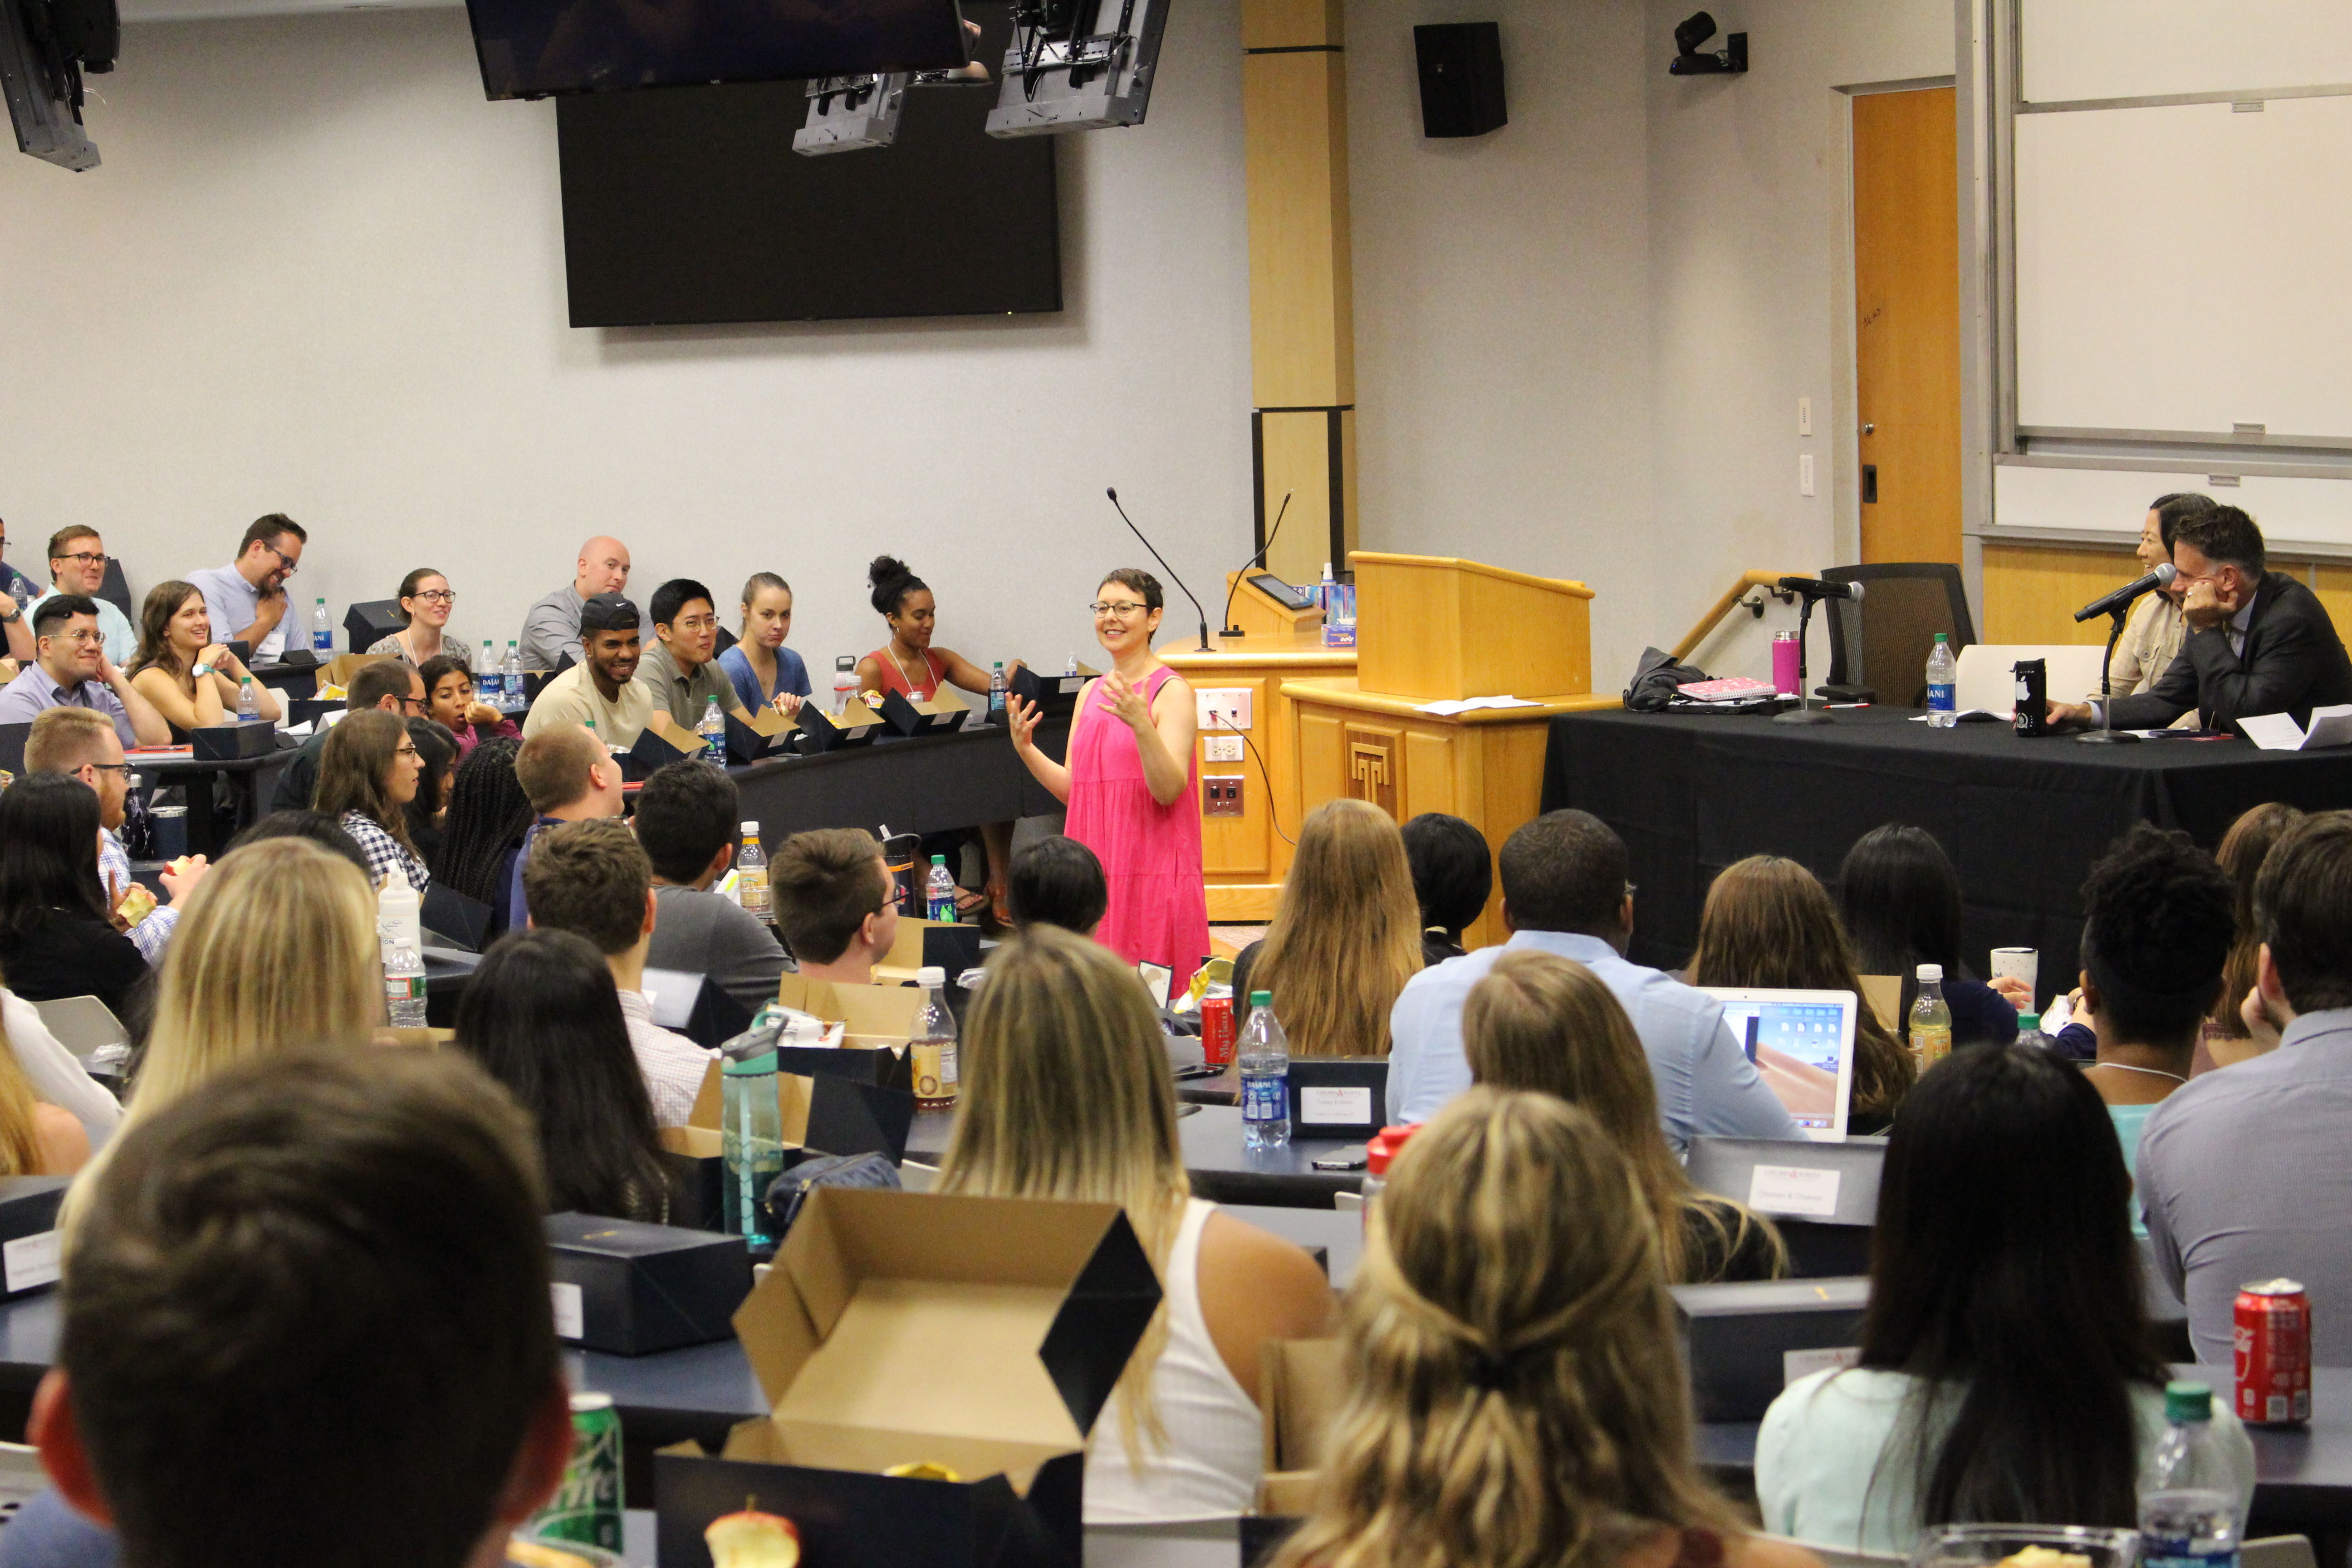 Temple Law welcomed the entering class of 2019 for Orientation events in Klein Hall.